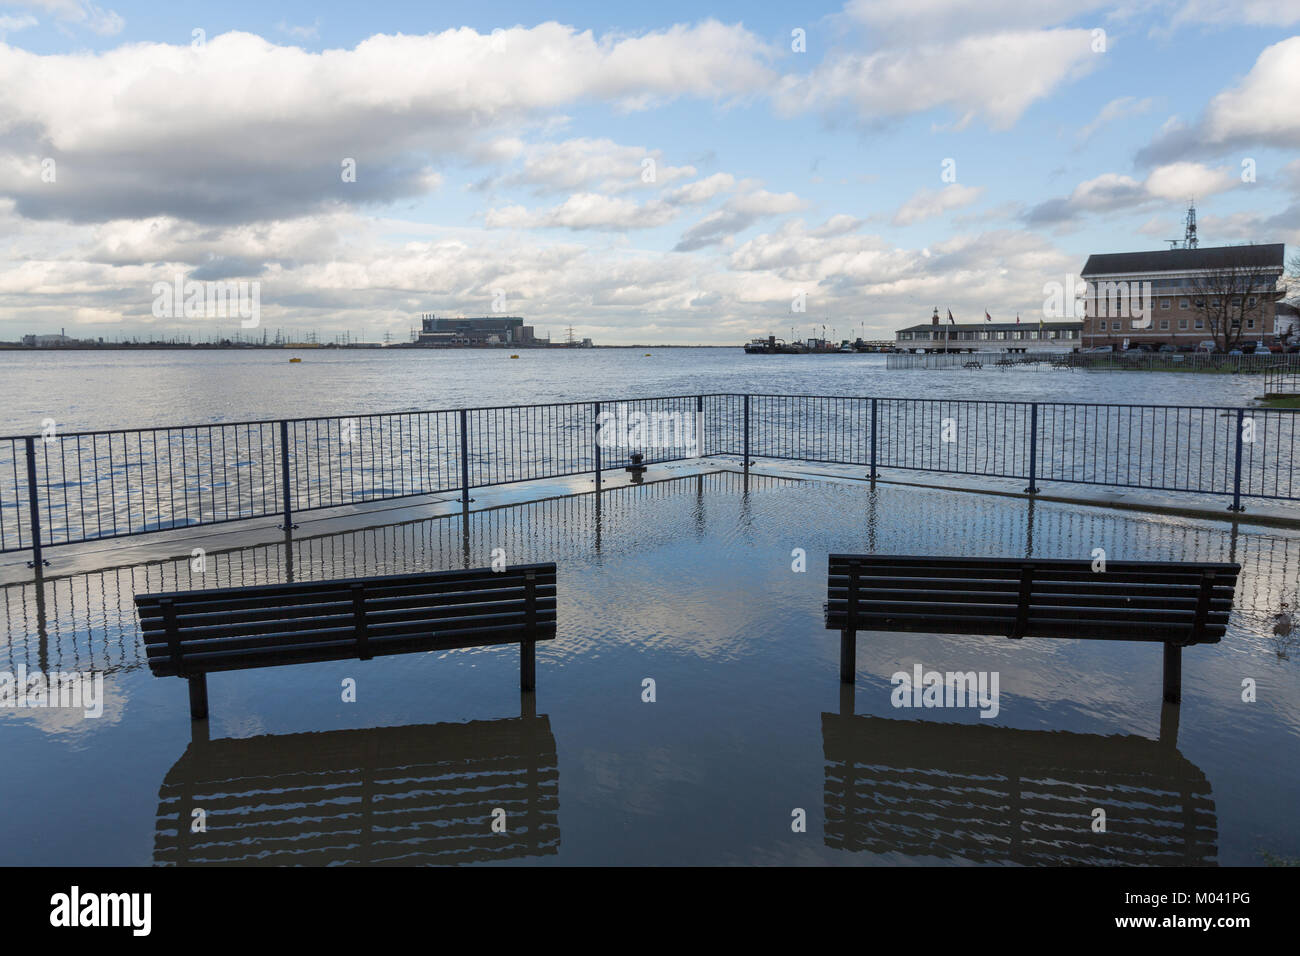 Gravesend, Kent, United Kingdom. 18th January, 2018. An extremely high tide in Gravesend today saw the water lapping around the floor of the town pier and flooding footpaths. Rob Powell/Alamy Live News Stock Photo